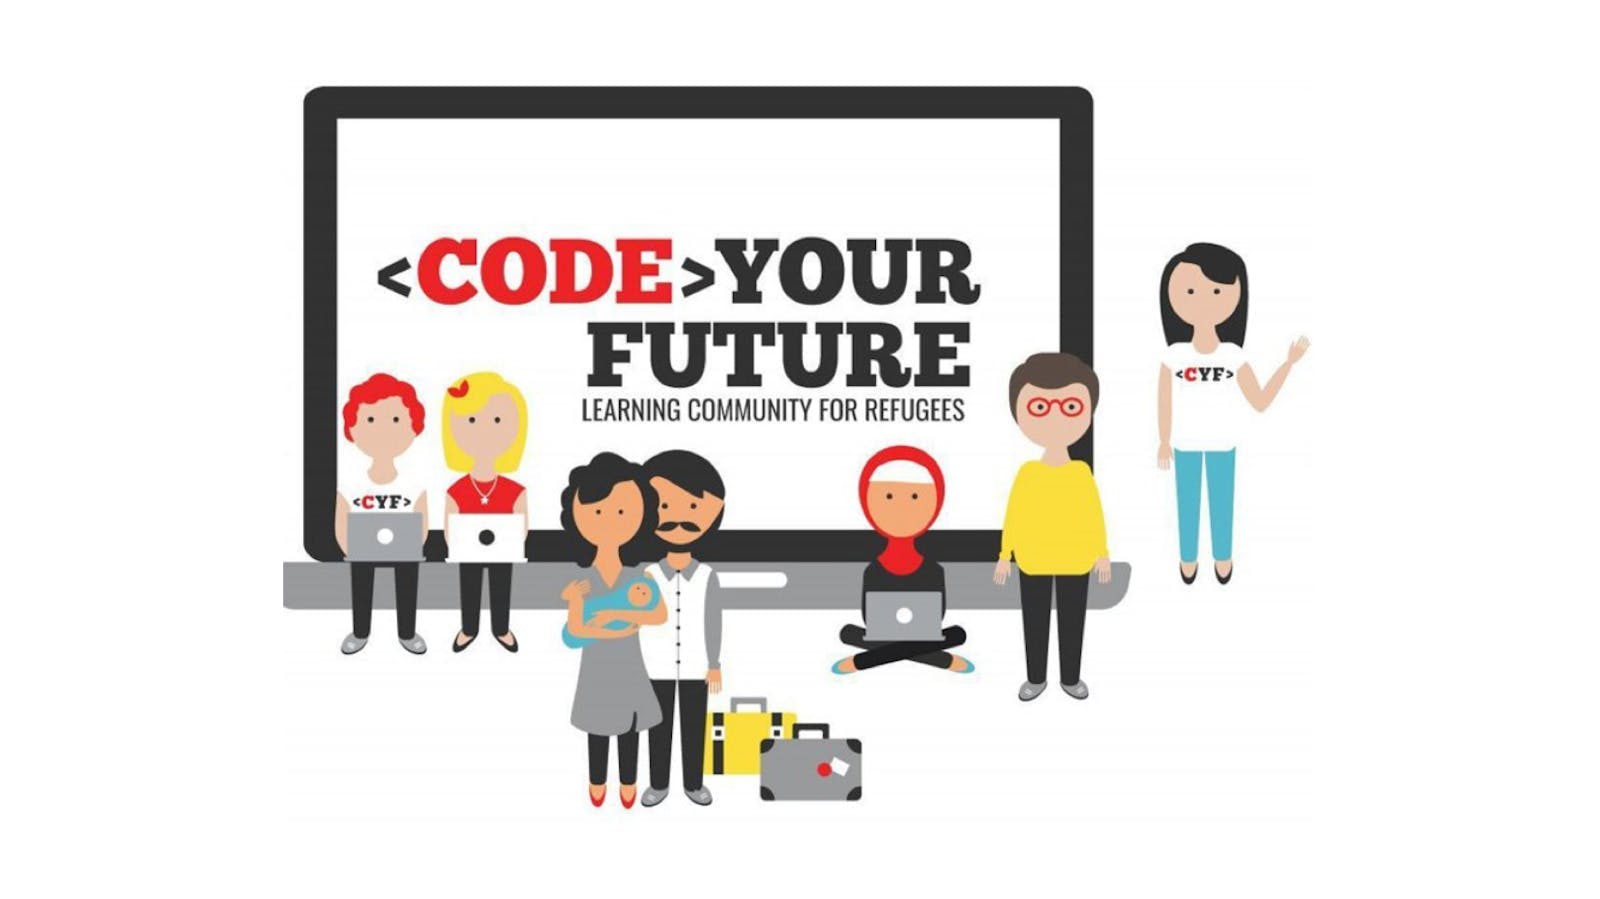 Code your future - learning community for refugees